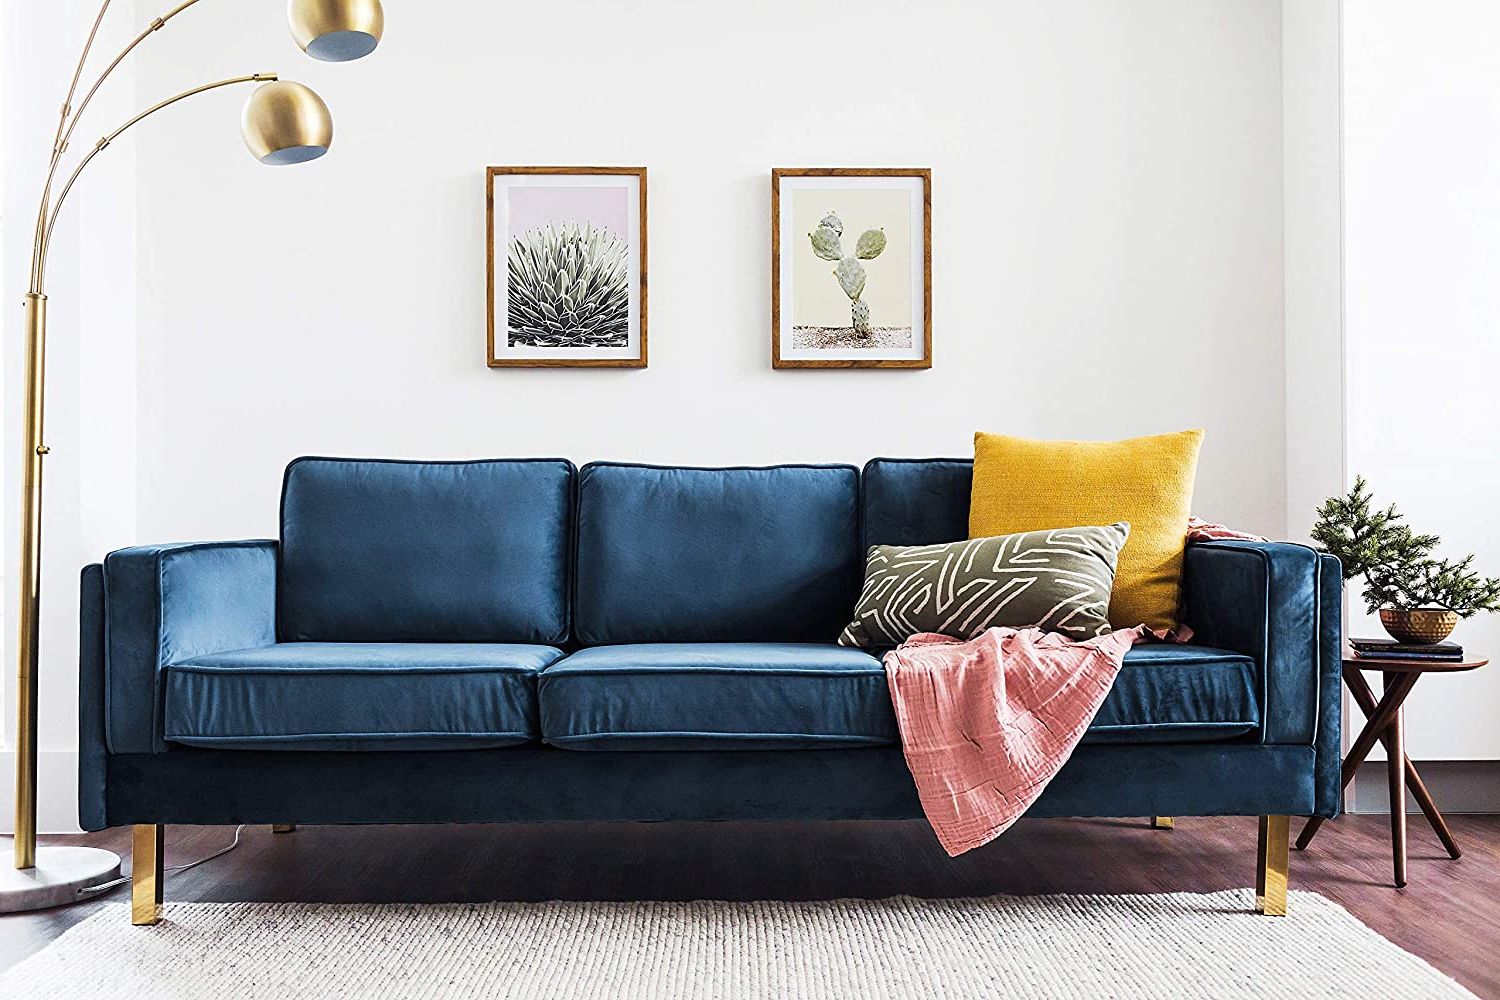 Sofas In Blue Intended For Famous Blue Velvet Sofas With Creative Living Room Decor Ideas (View 8 of 15)